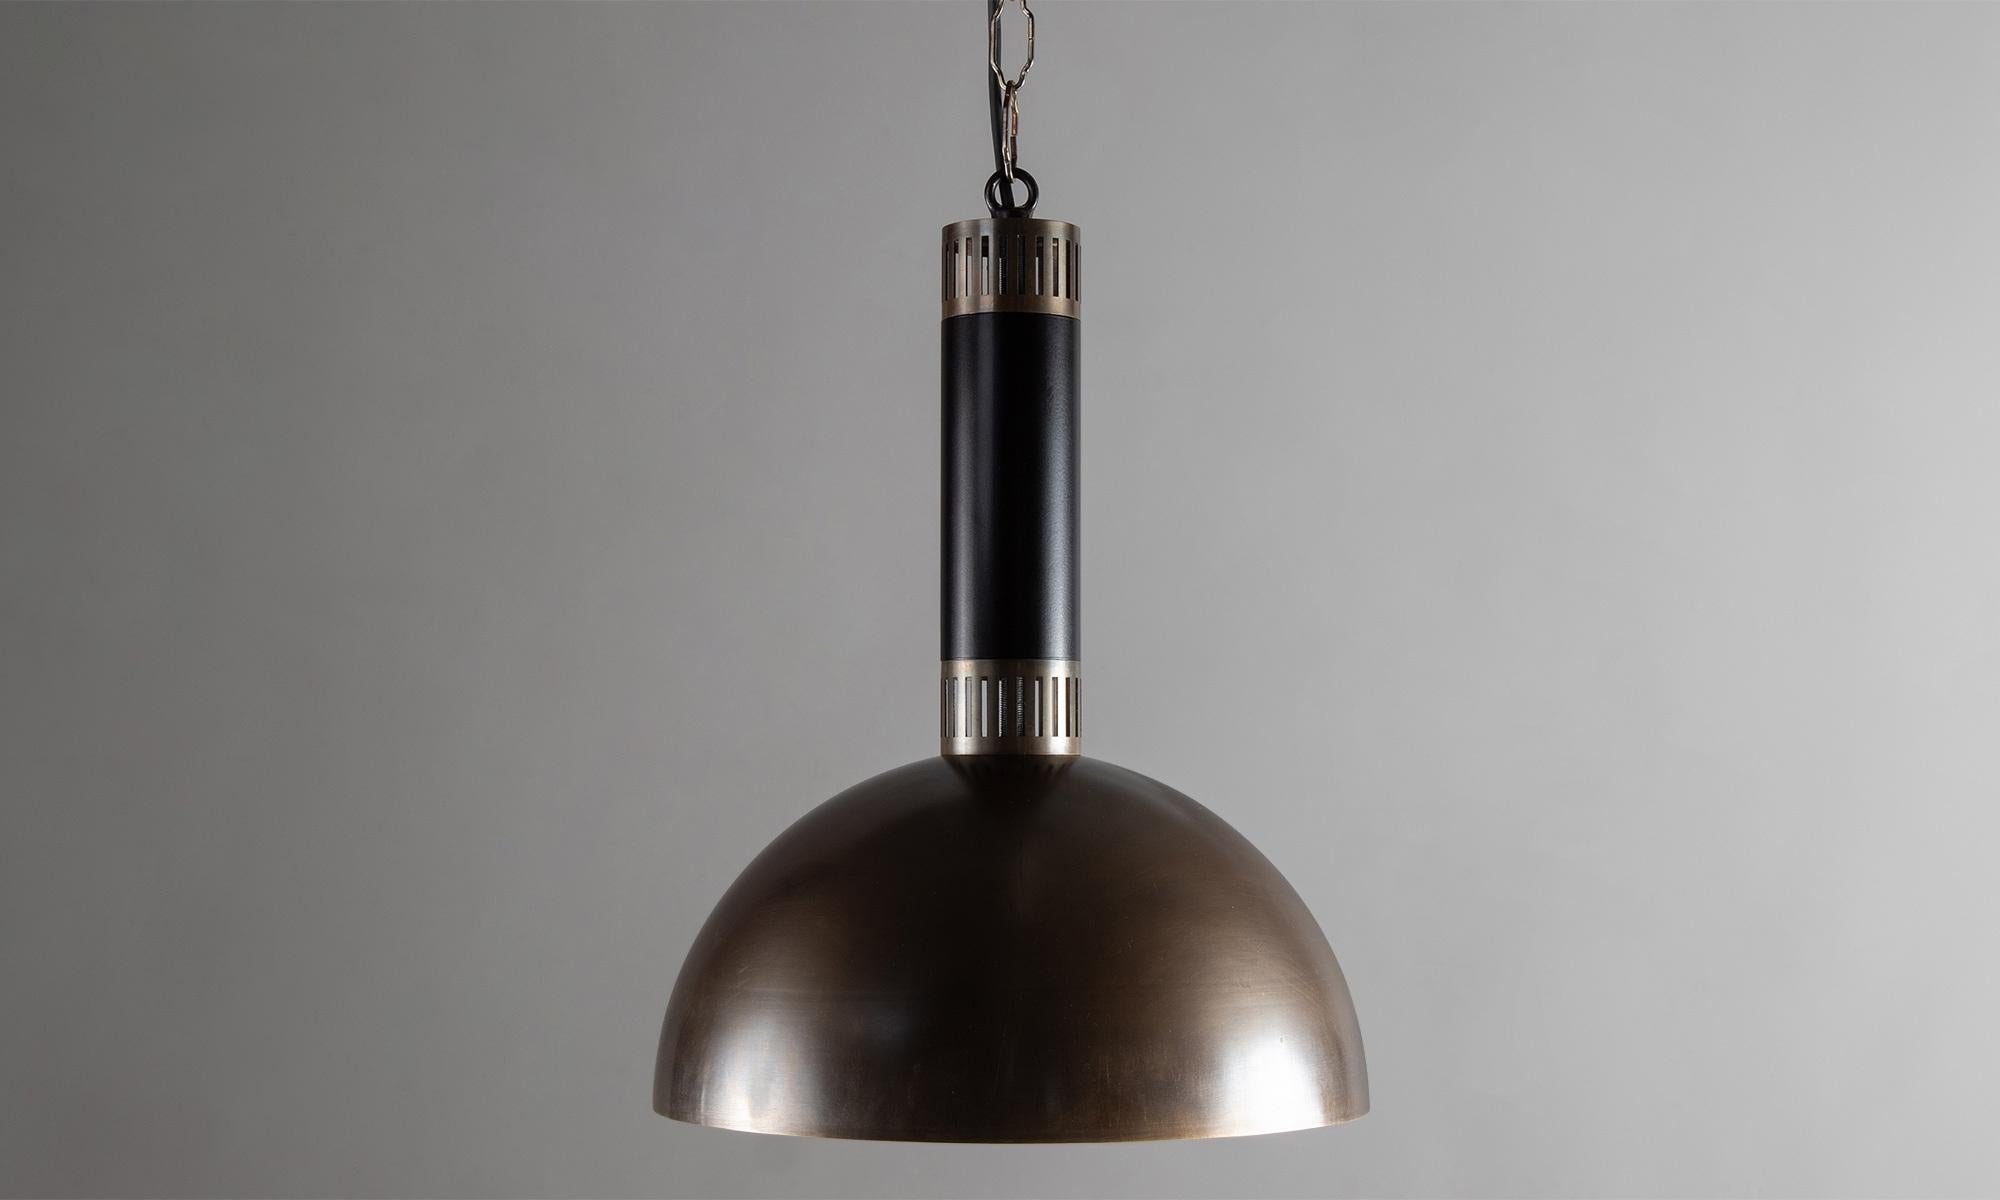 Black Metal / Satin Glass Diffuser Pendant
Made in Italy
Black metal pendant with brass details and satin glass diffuser below.
12